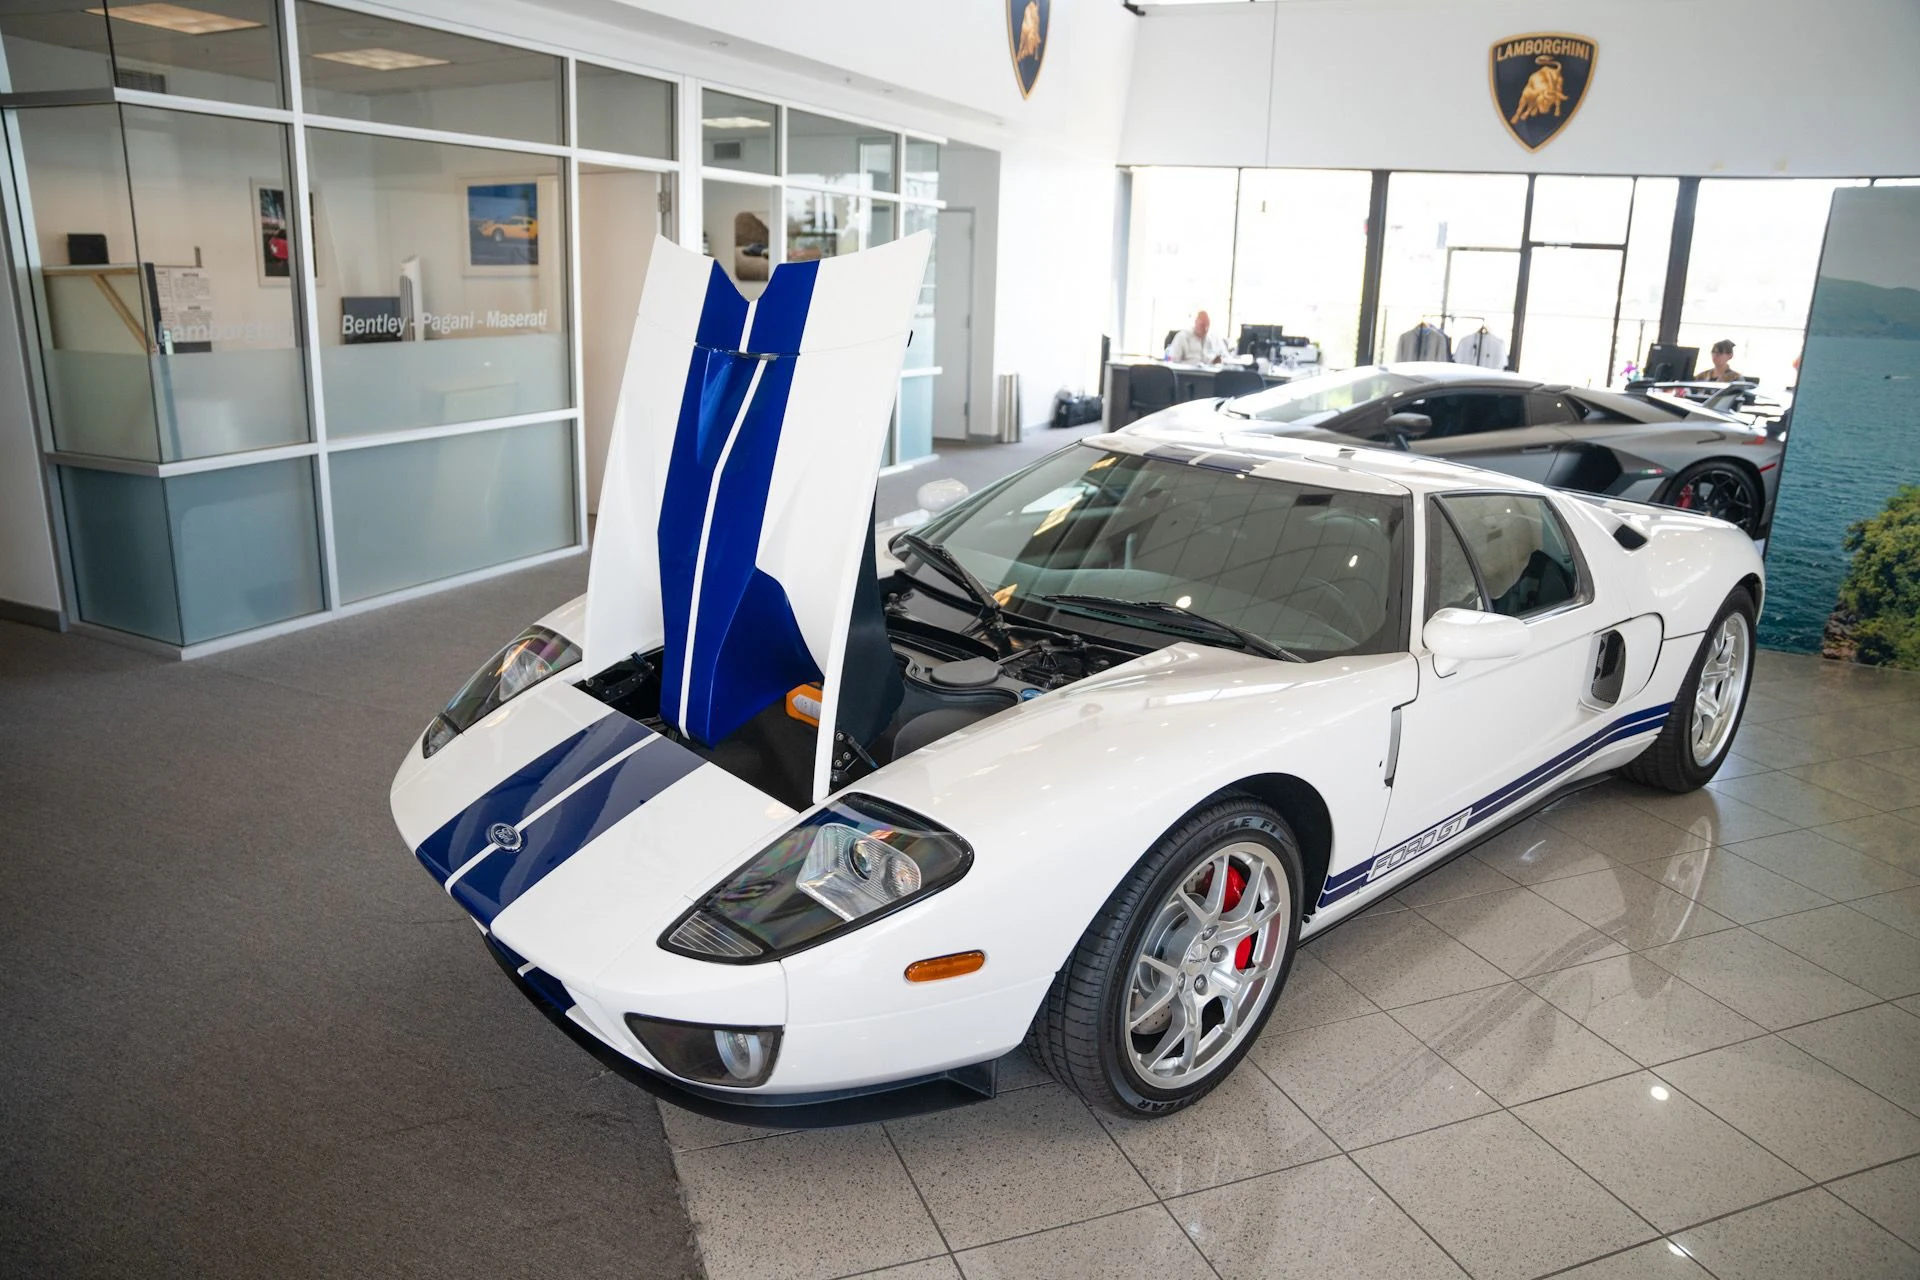 Used 2006 Ford GT coupe (48)